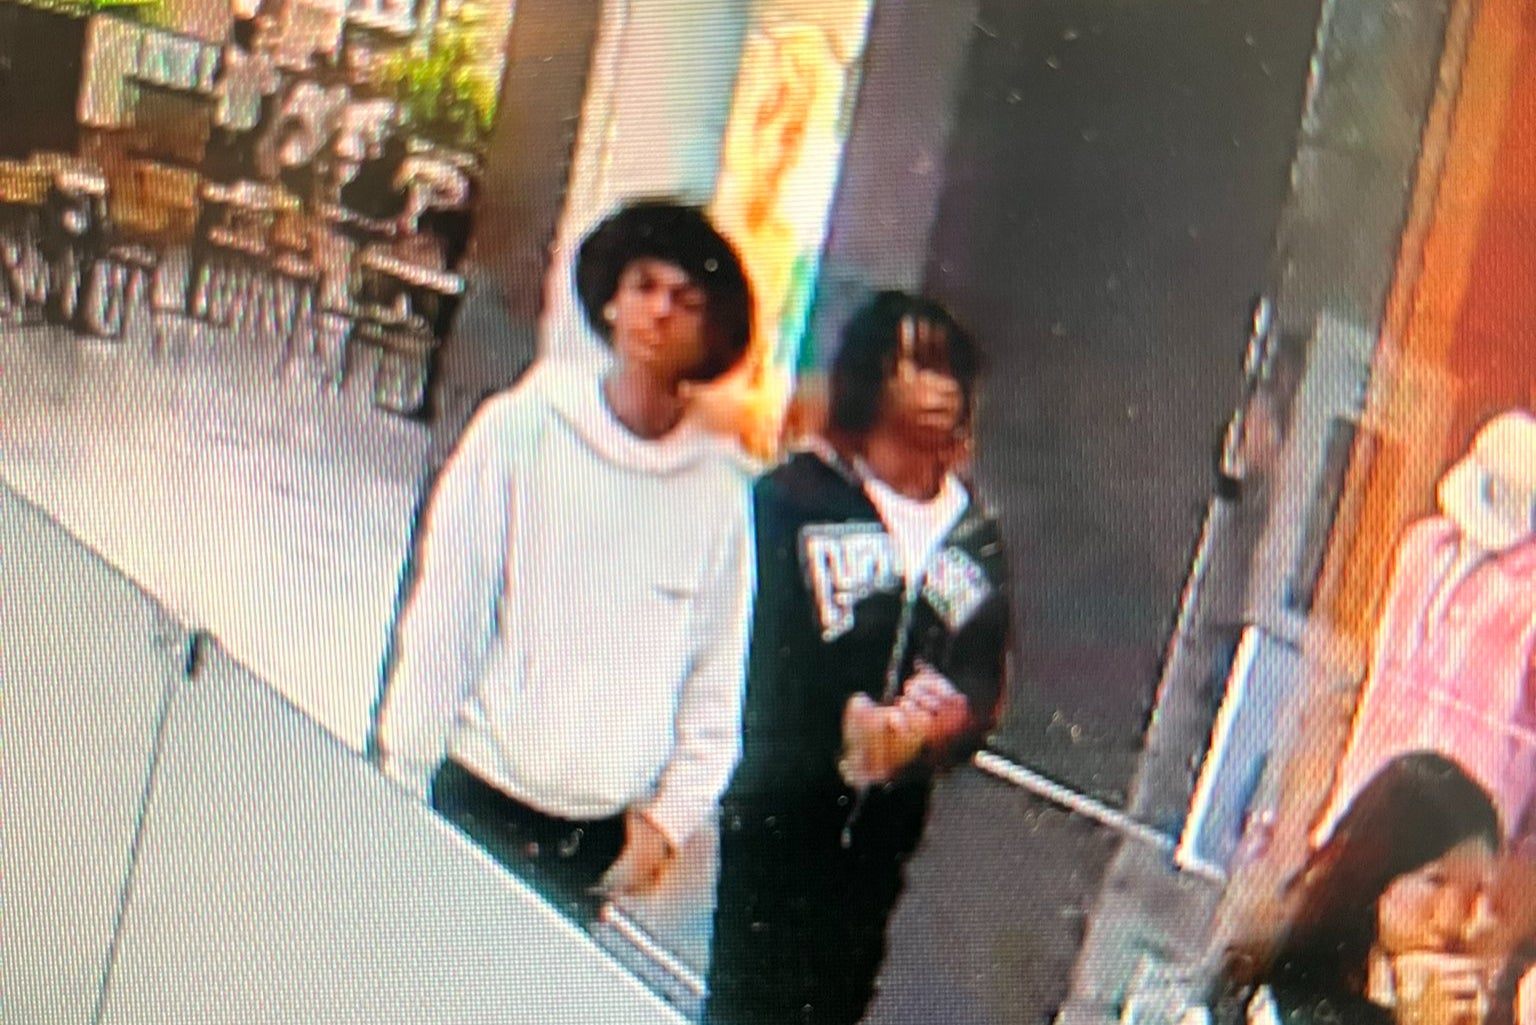 A photo of the suspect in the mall shooting was released by police, and the 16-year-old was later brought in by his own mother